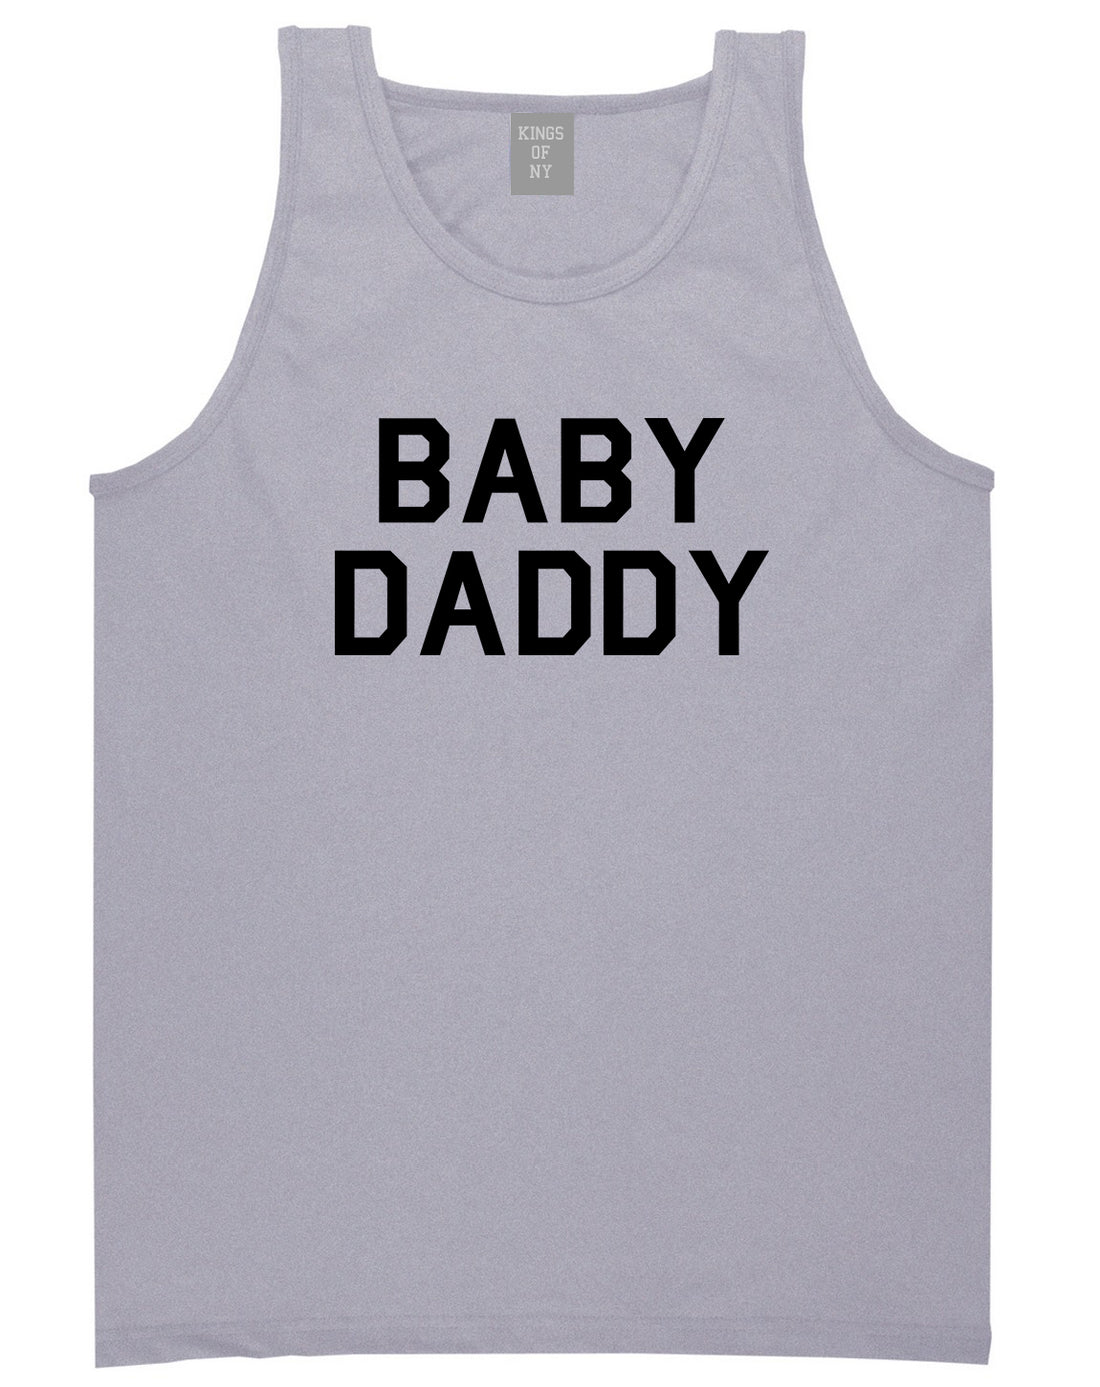 Baby Daddy Funny Fathers Day Mens Tank Top Shirt Grey